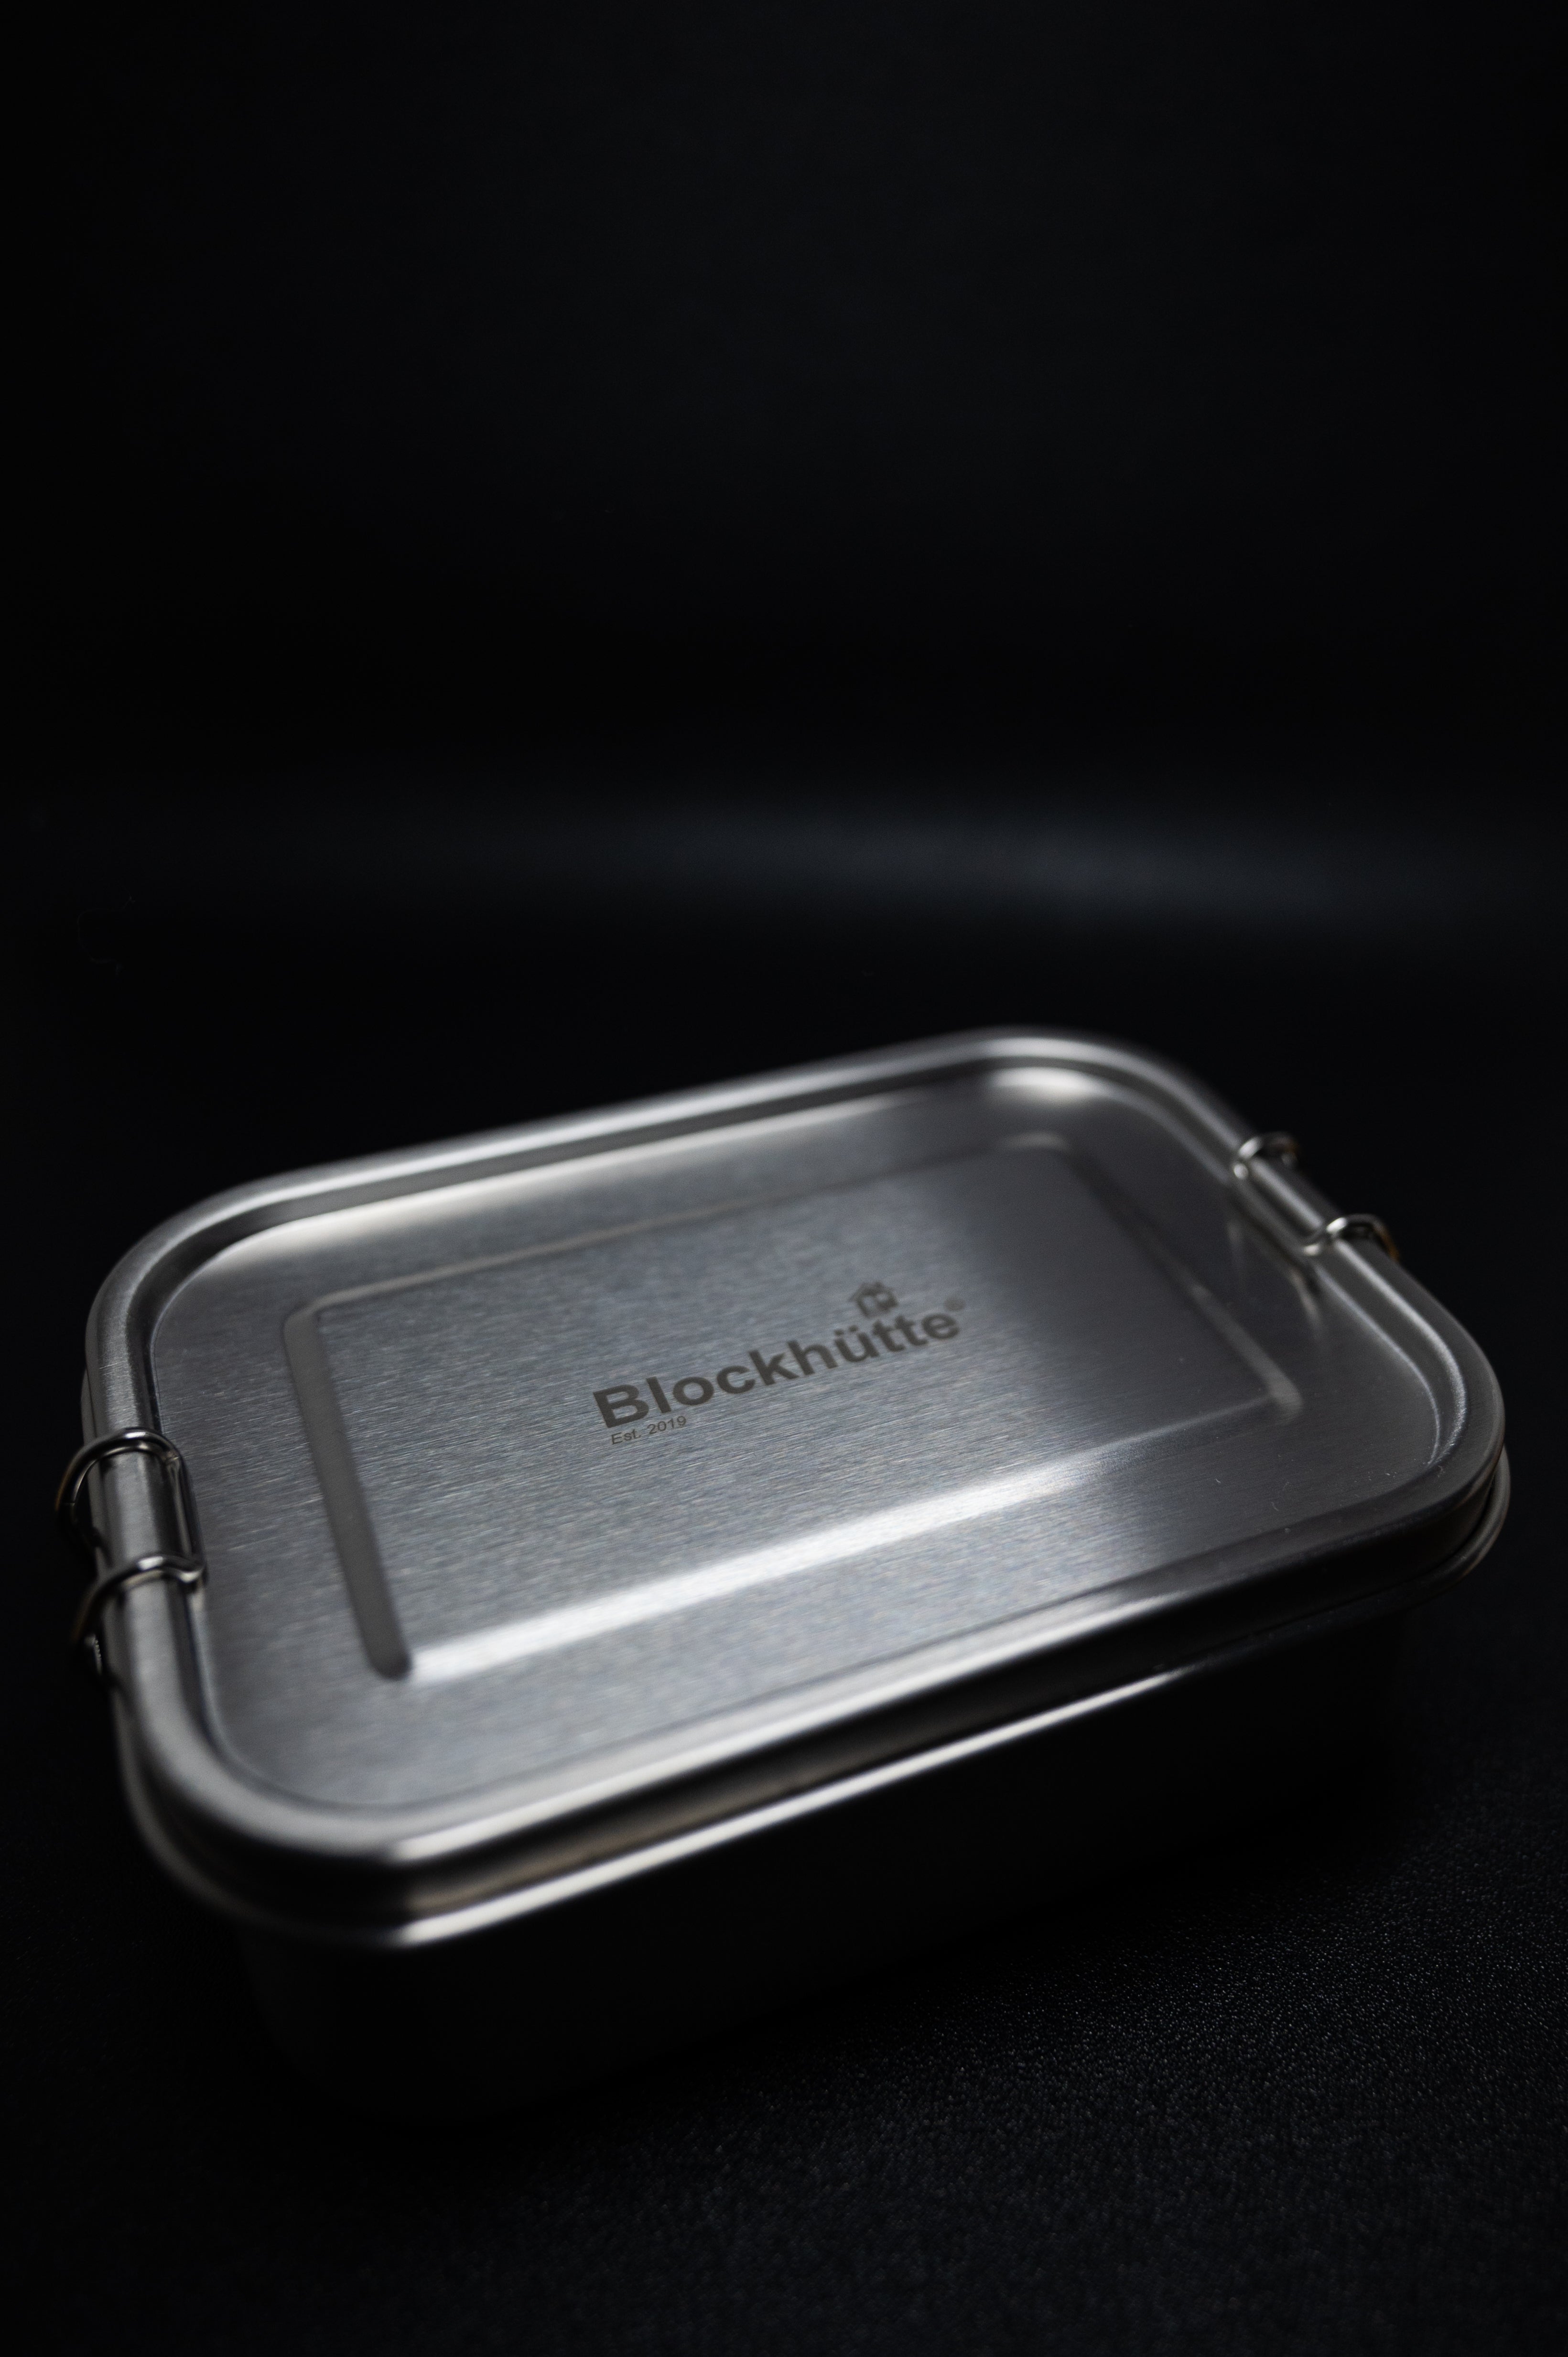 Blockhuette stainless steel lunch box in front of dark background